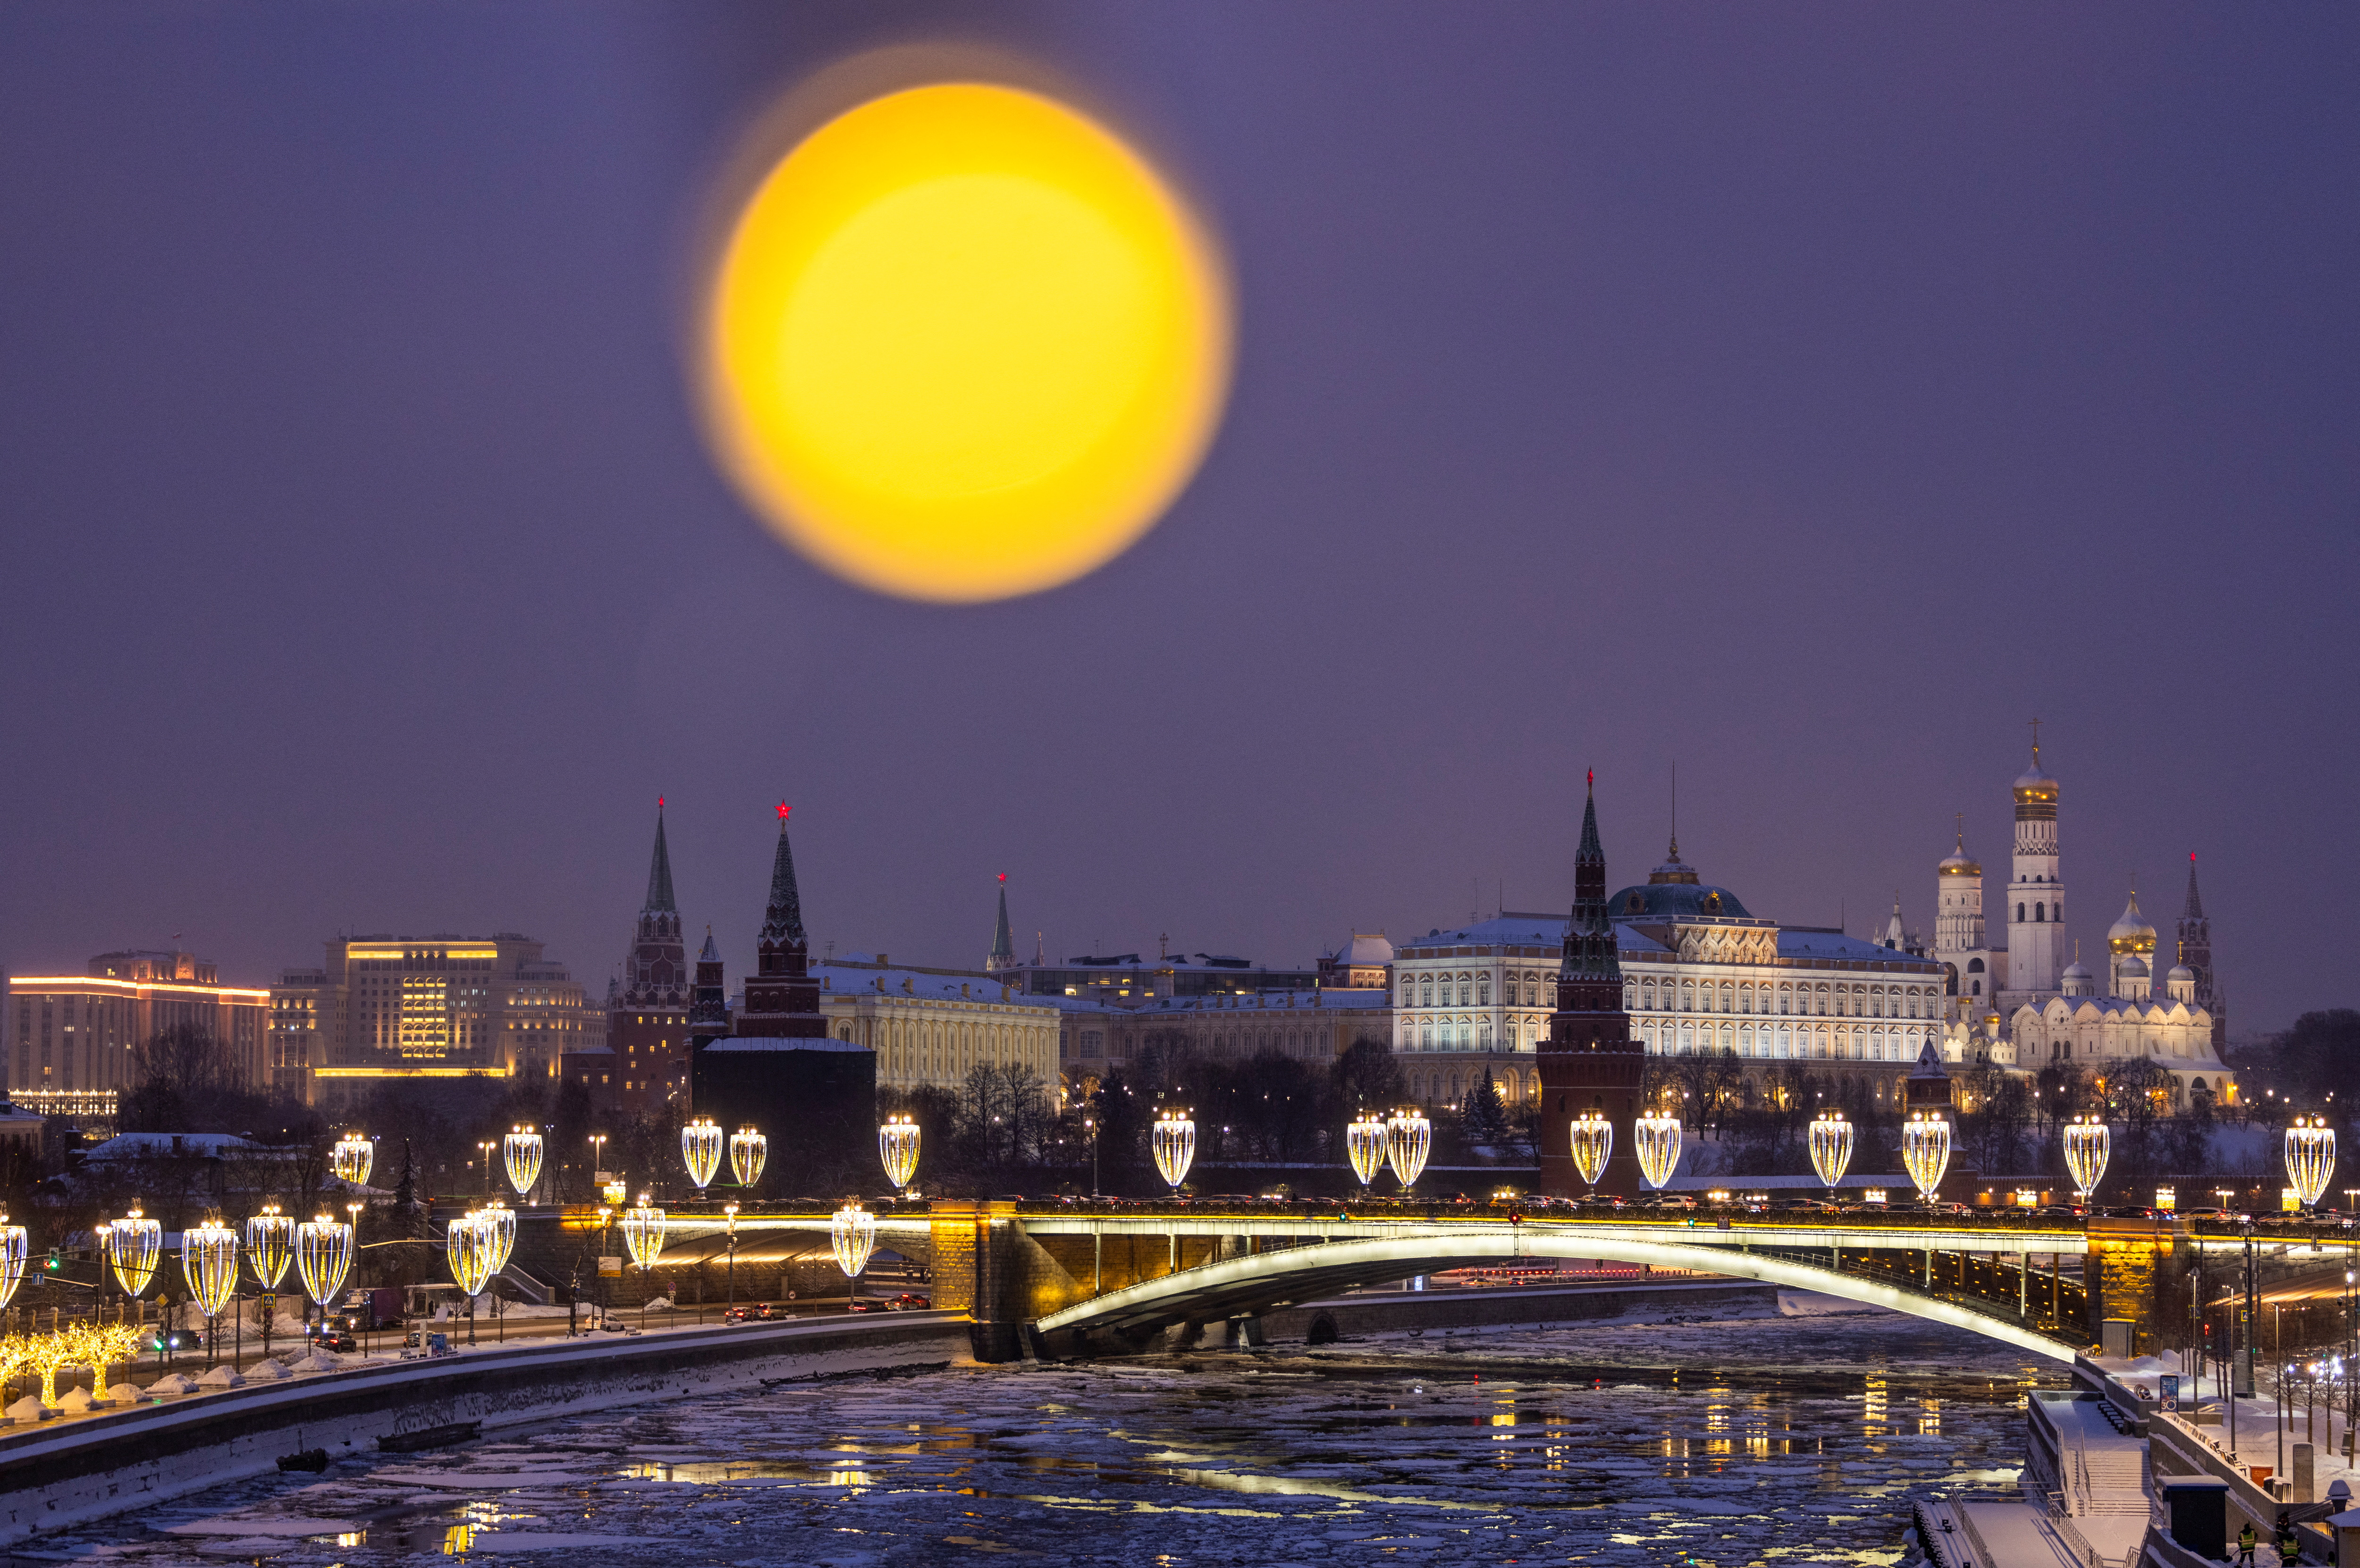 The Kremlin is seen next to the partially frozen Moskva river in Moscow